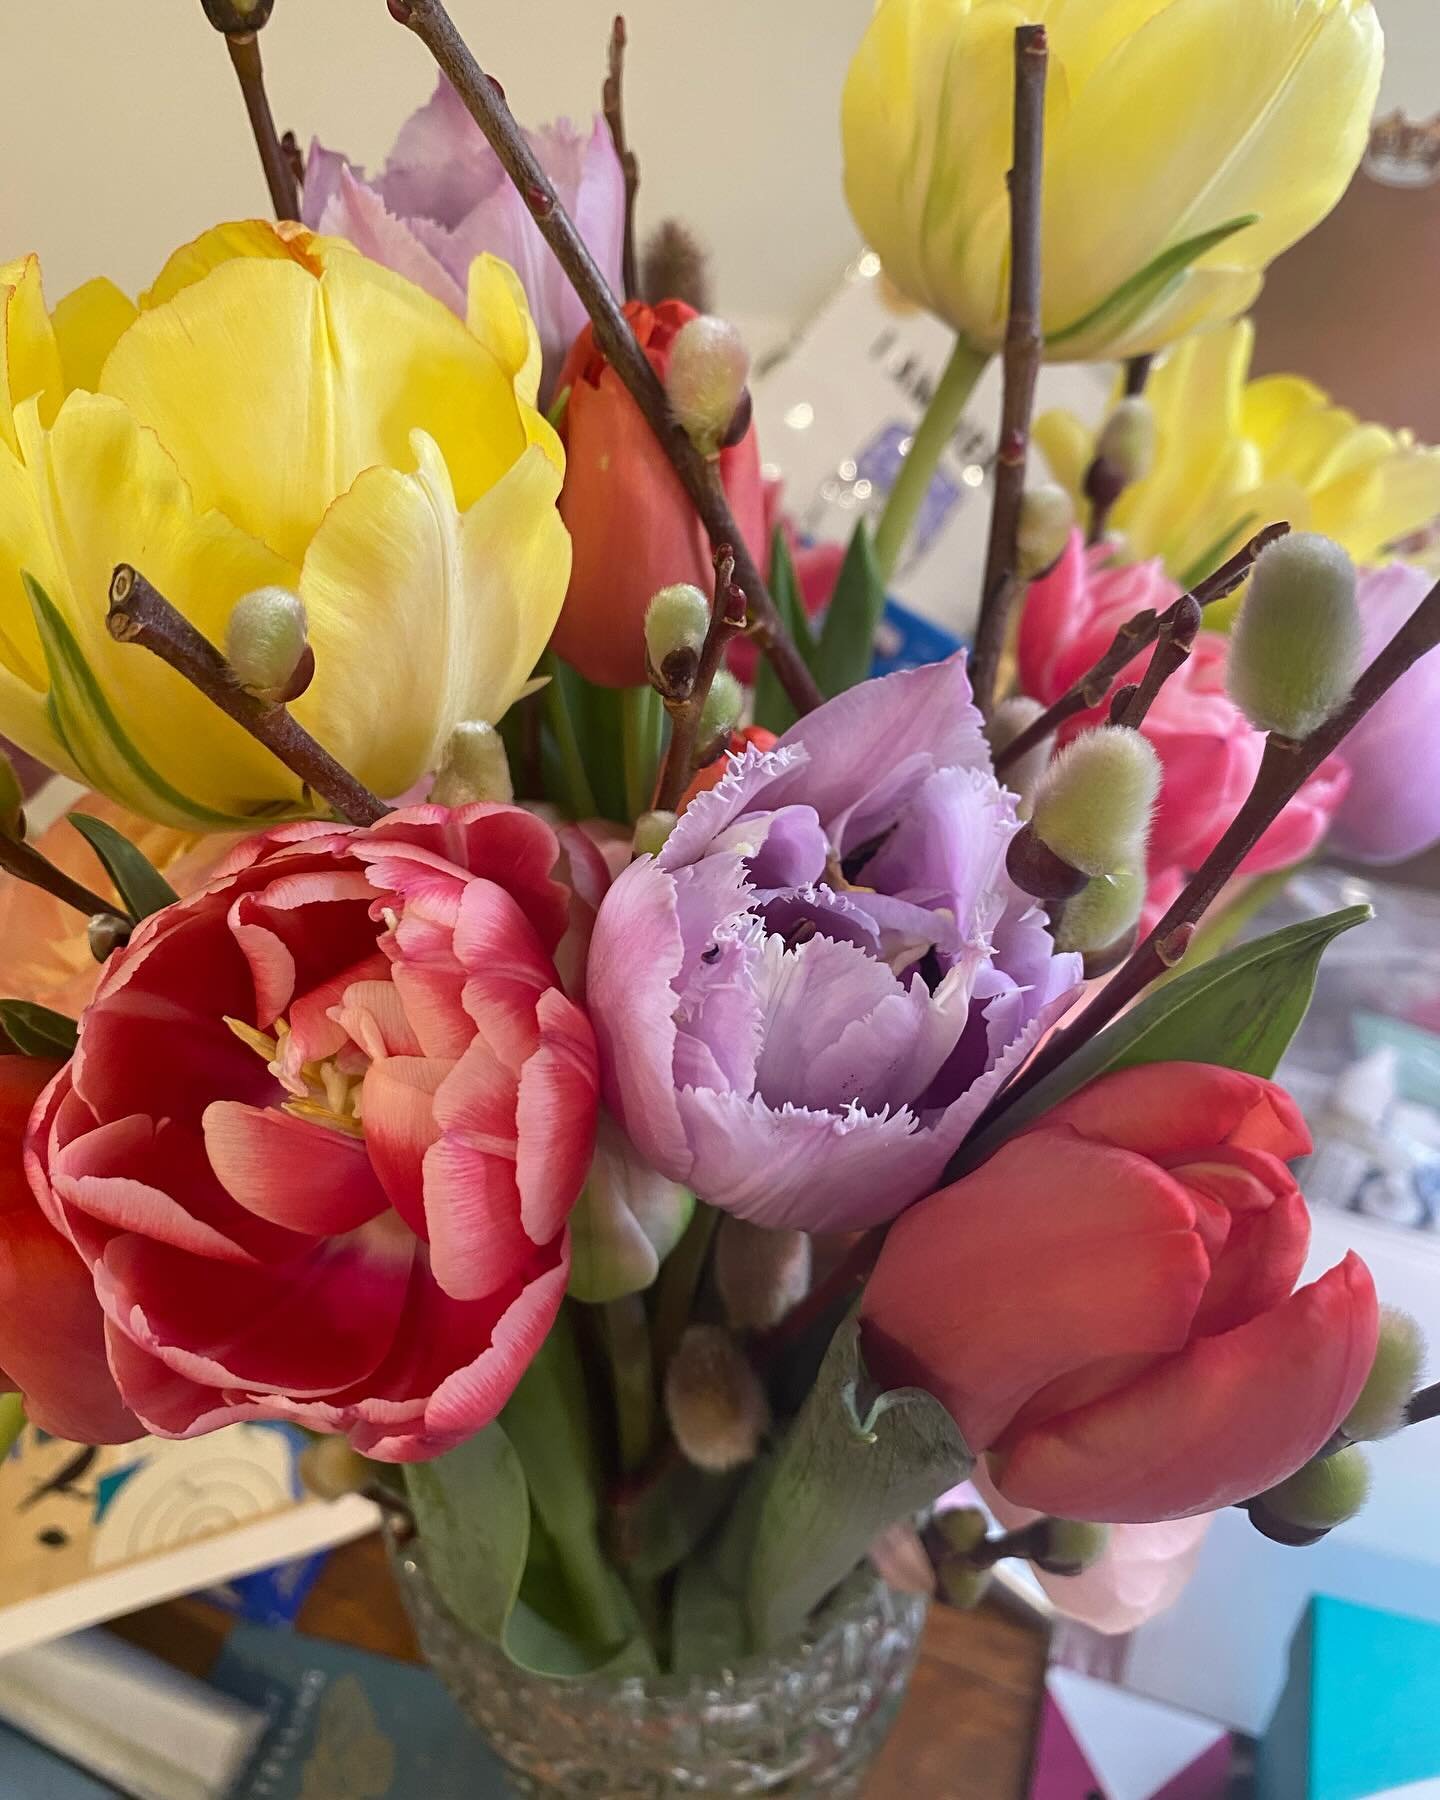 The most beautiful bouquet from @dahliamayflowerfarm ! Thank you to Melanie and everyone who sent warm wishes for my birthday! It was a good one!
It&rsquo;s going to be a strange weather day so I will be in studio hunkering down to make more art and 